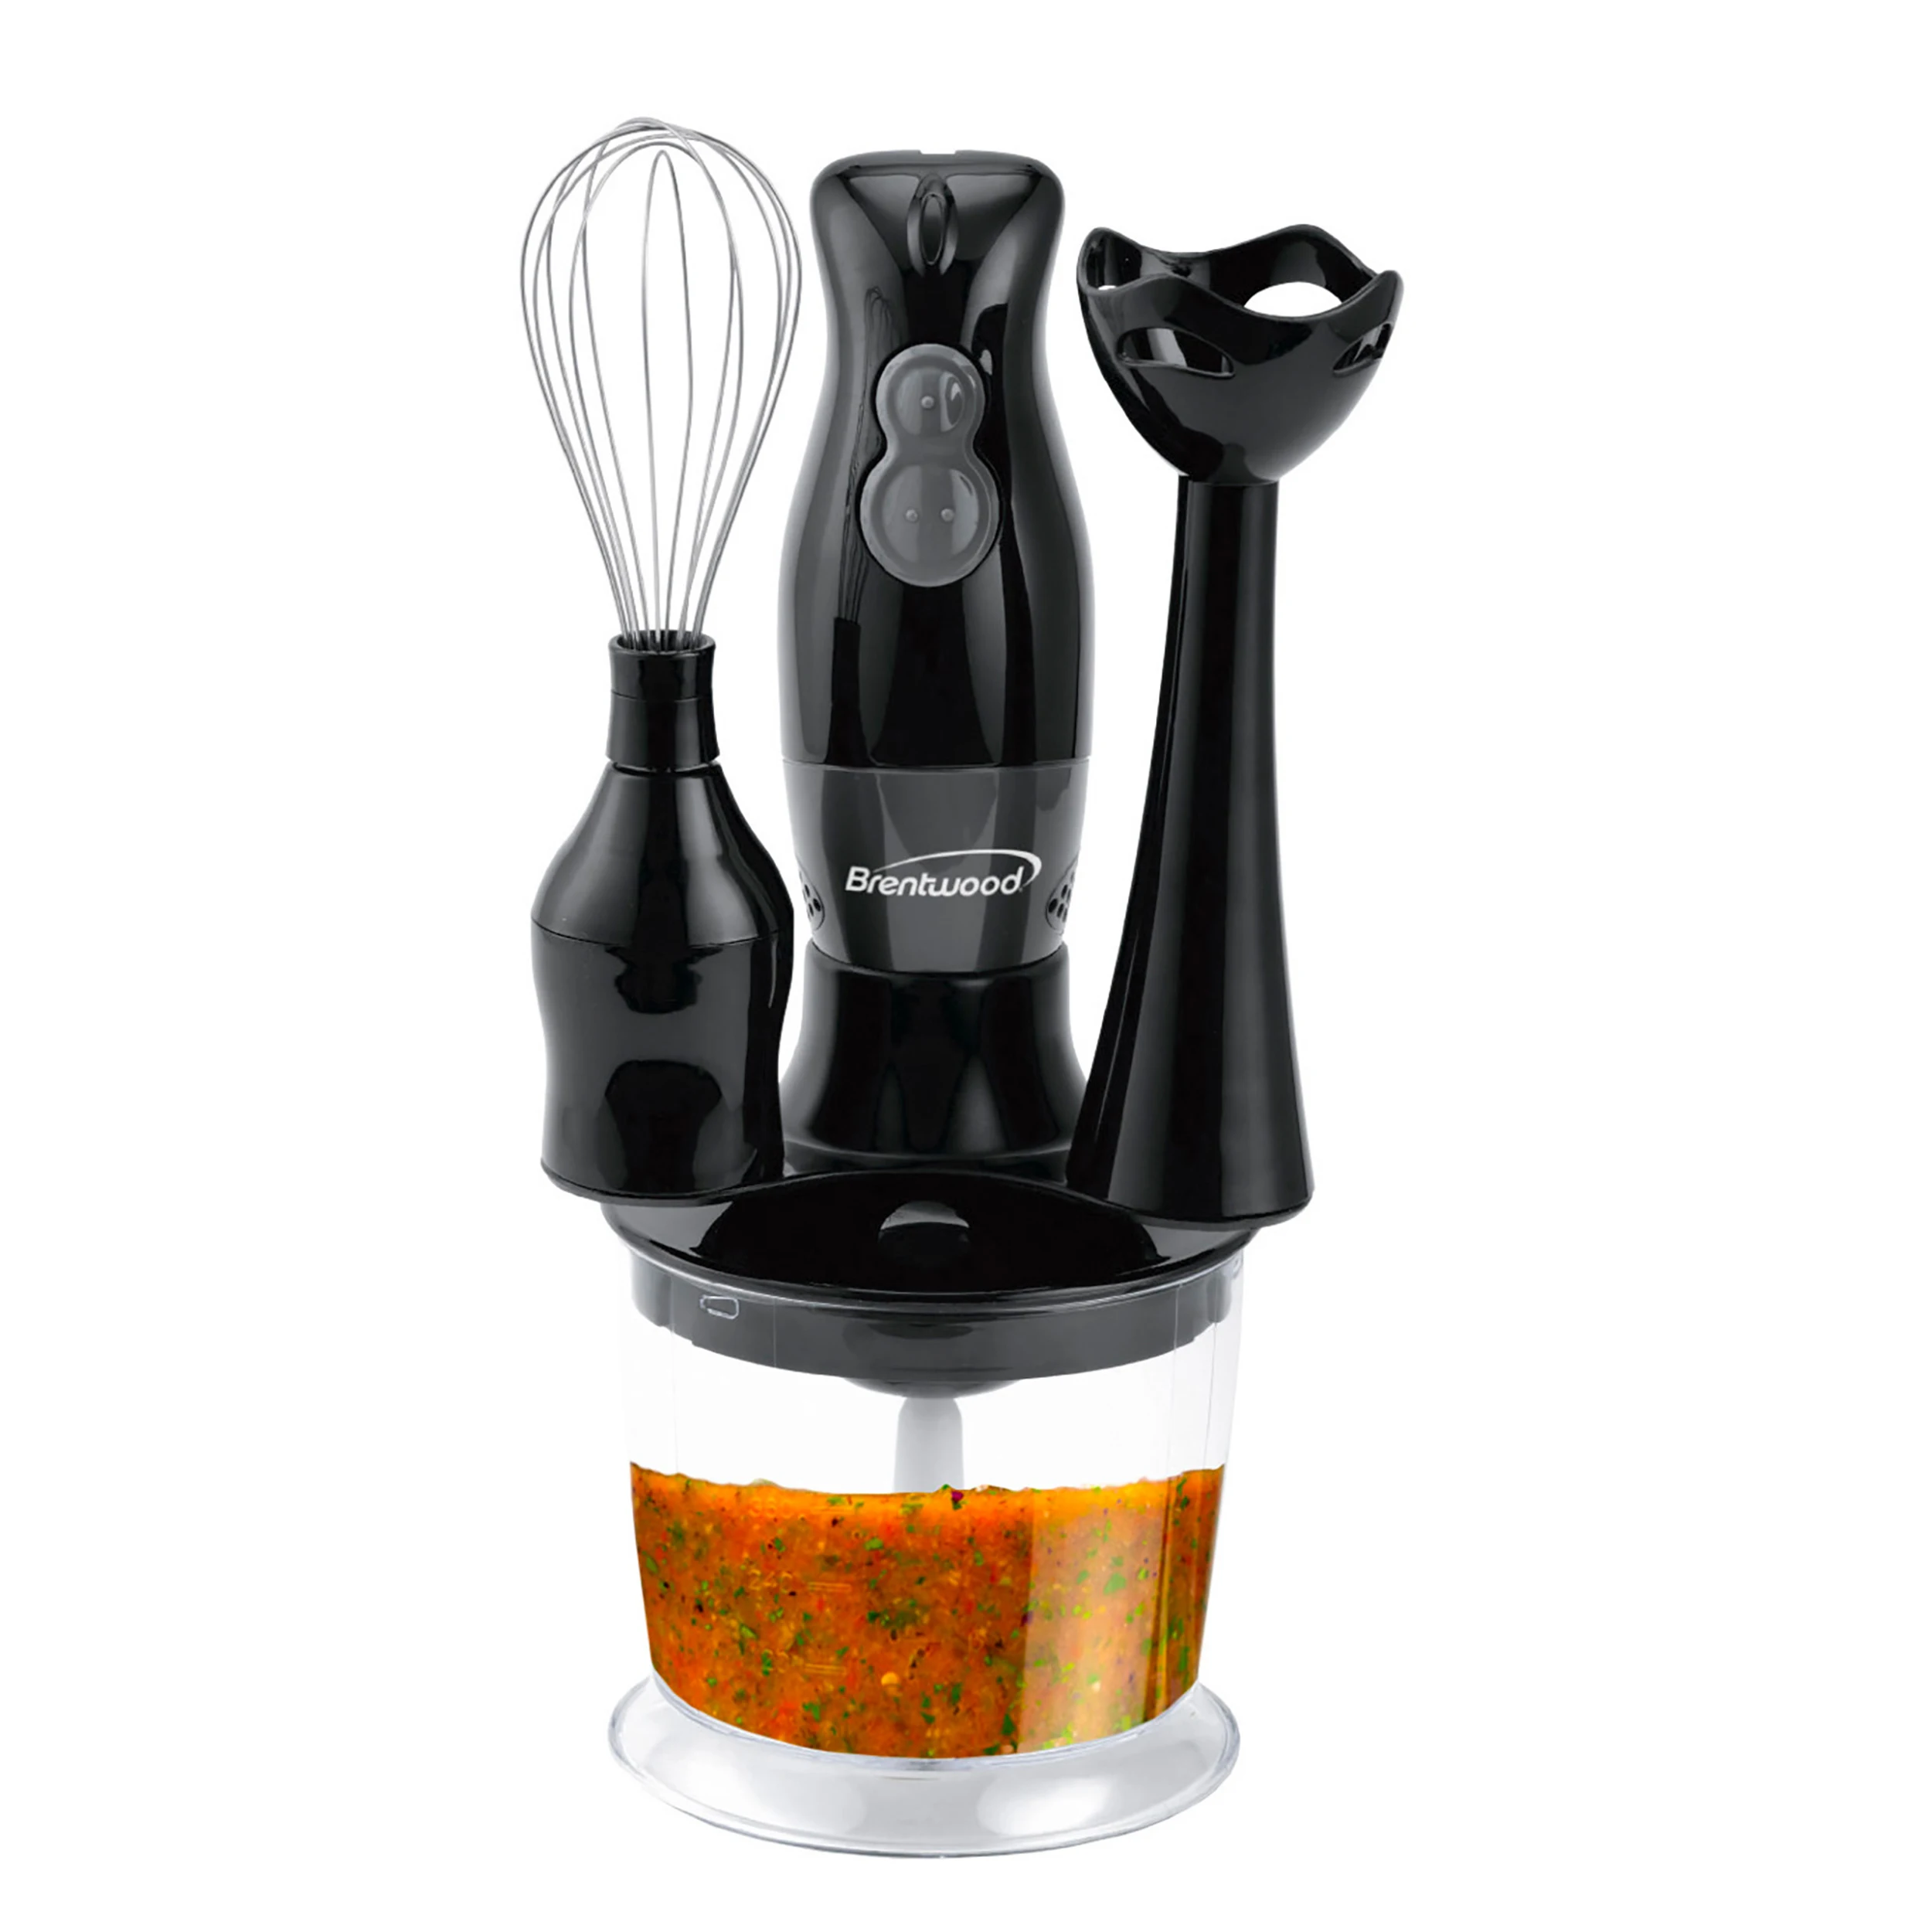 

Mixer Appliances HB-38BK 2-Speed Hand Blender And Food Processor With Balloon Whisk (Black) for kitchen